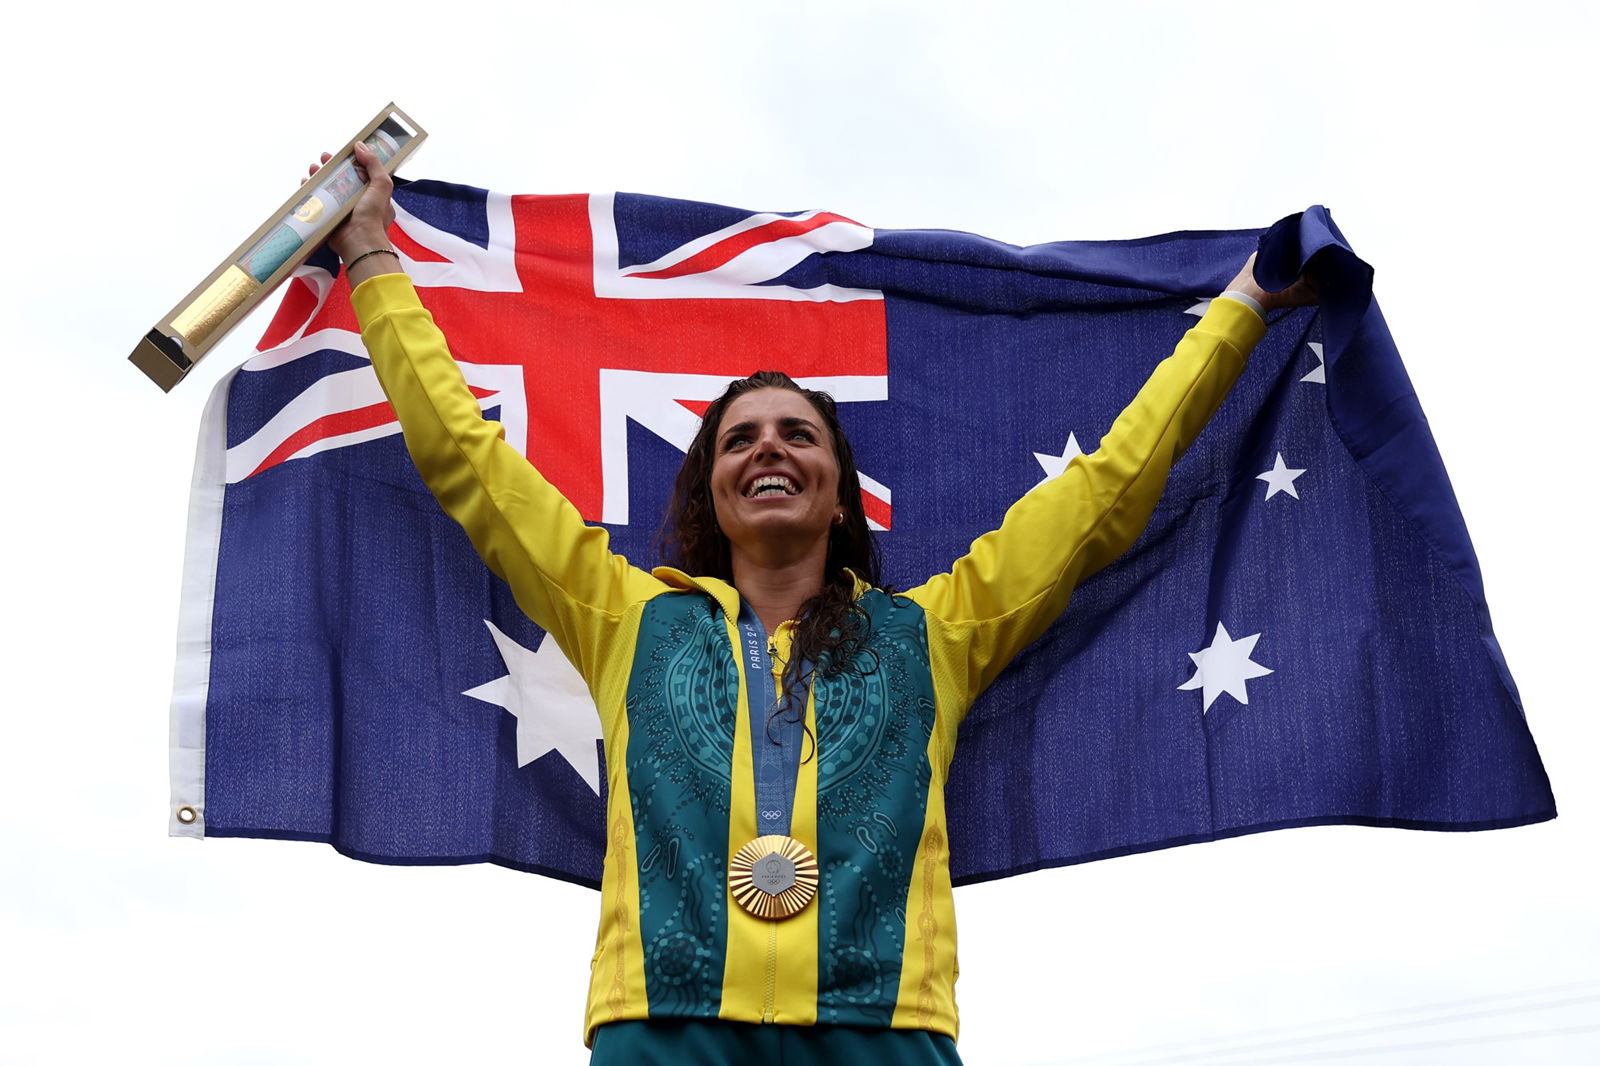 Jess Fox smiles while holding up the Australian flag behind her as she wears a gold medal after the C1 canoe slalom final.